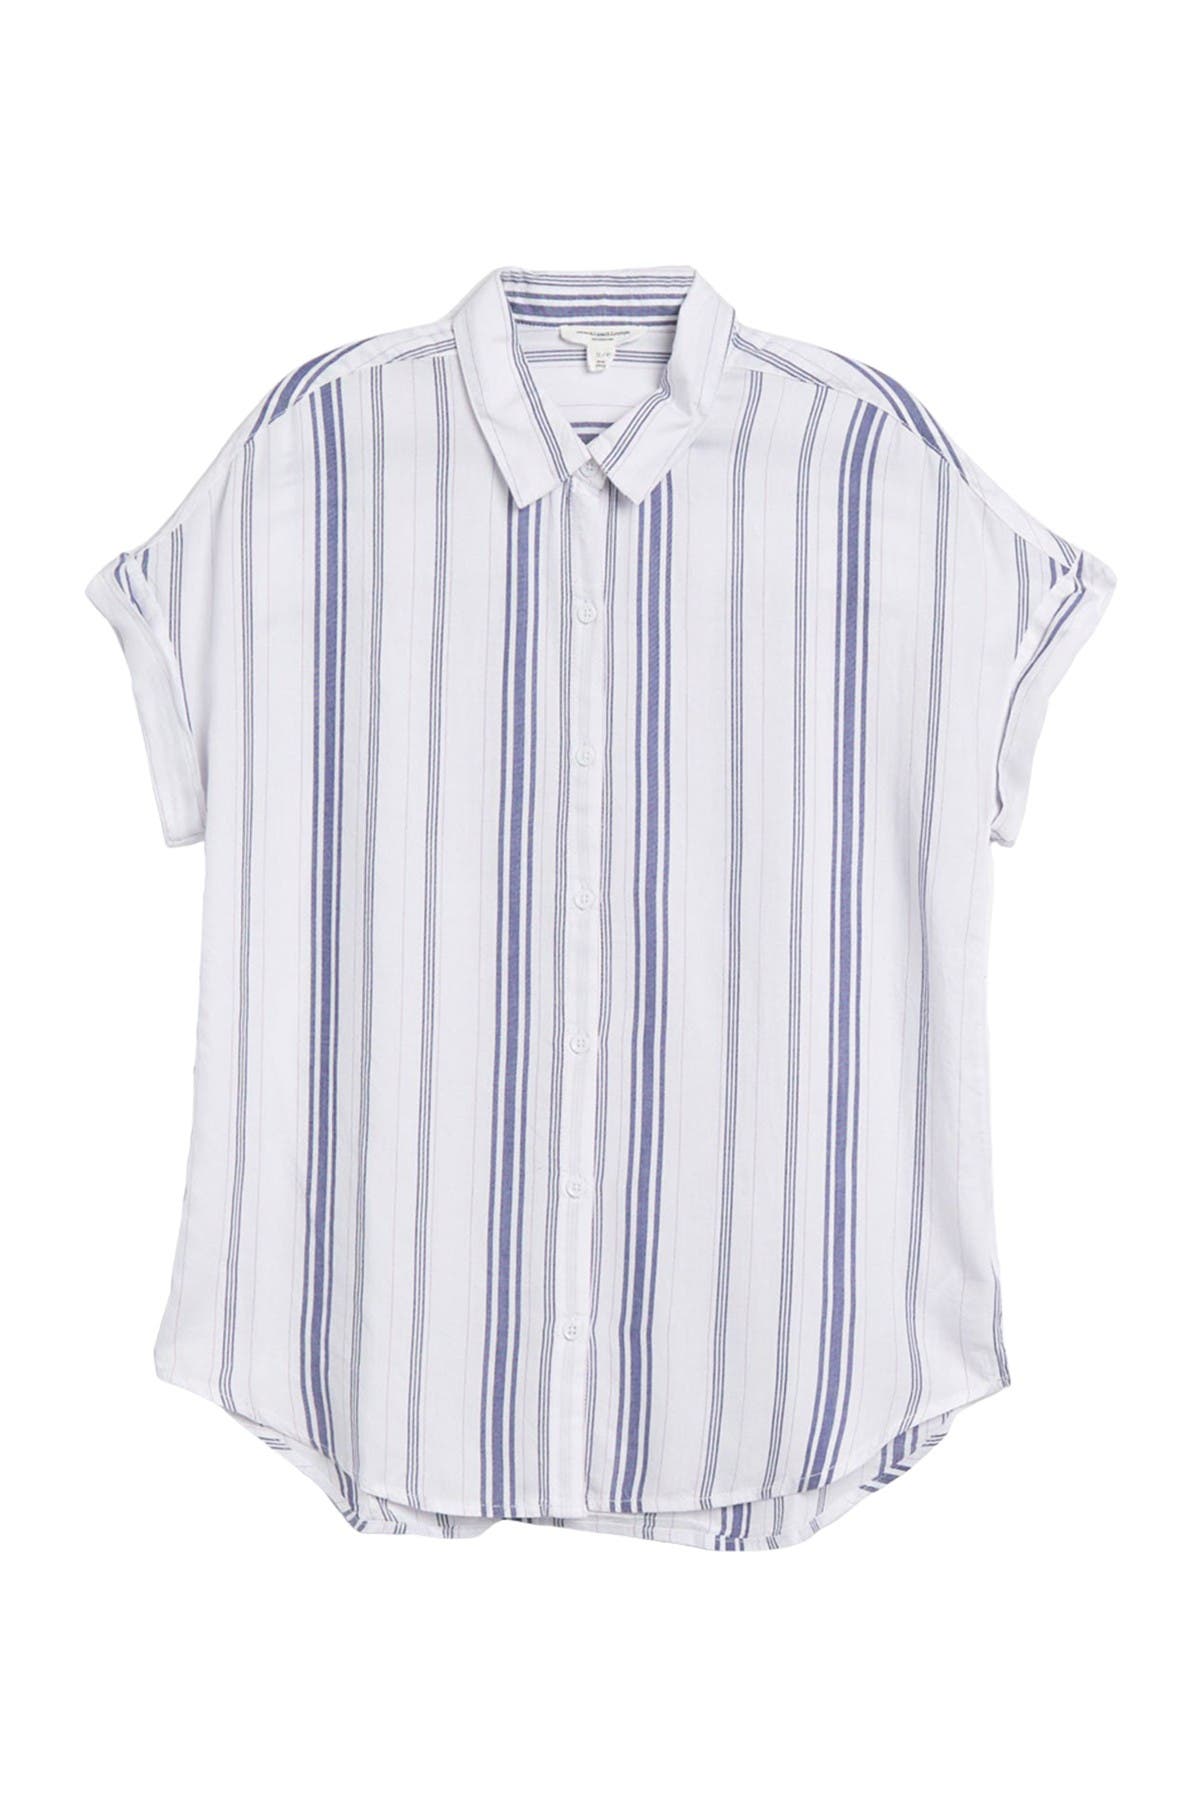 Beachlunchlounge Spencer Striped Short Sleeve Camp Shirt In Berry Blue